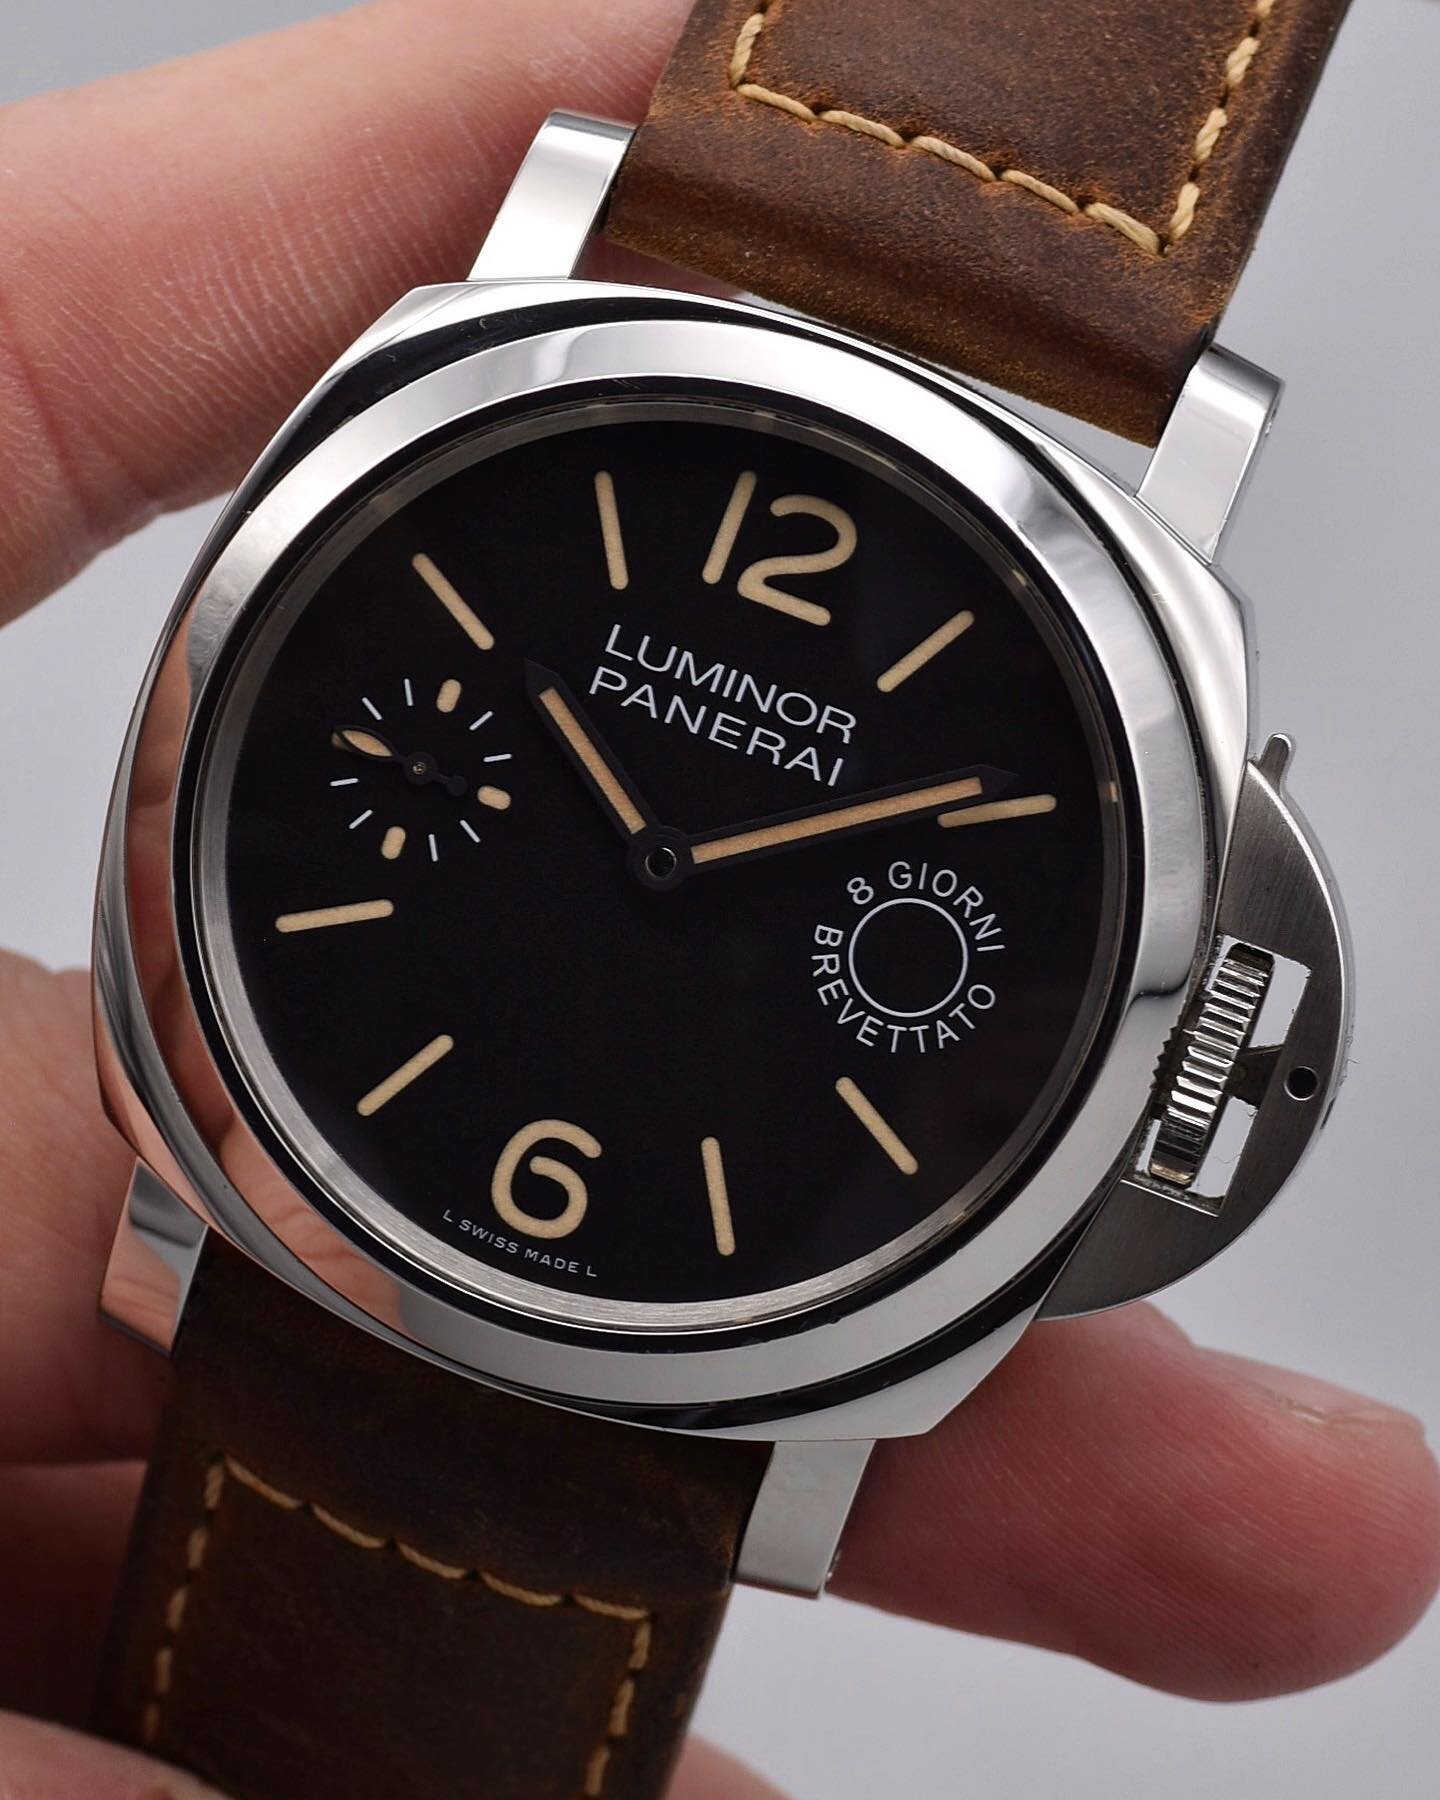 🚨 NWA 🚨 Panerai Luminor 8 Days PAM590⬇️

Displaying the iconic &lsquo;8 Giorni Brevettato&rsquo; on the dial, the PAM590 is an awesome Panerai Luminor 44mm, boasting an 8 Days power reserve! 👏🏼

Available now on fernotime.com ✅ 

#panerai #pam590